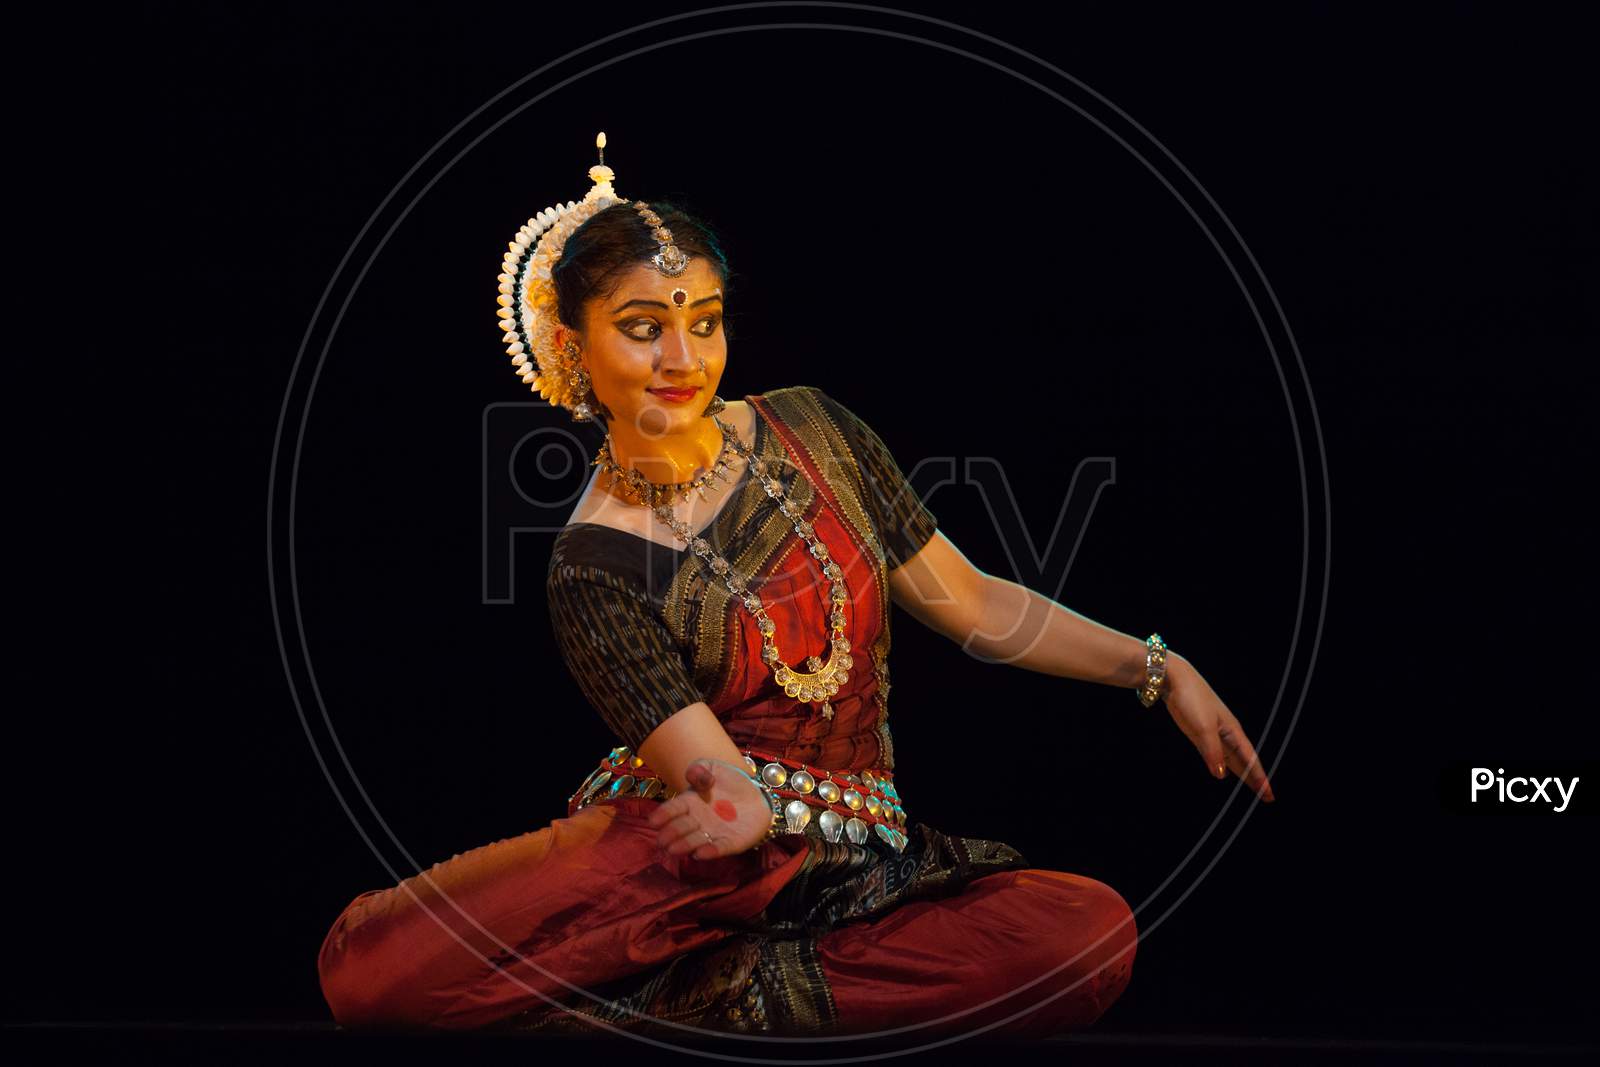 A highly talented junior Odissi dancer looks at the lord adoringly during the Odissi evening recital event on October 19,2018 at Bharatiya Vidhya Bhavan in Bengaluru,India